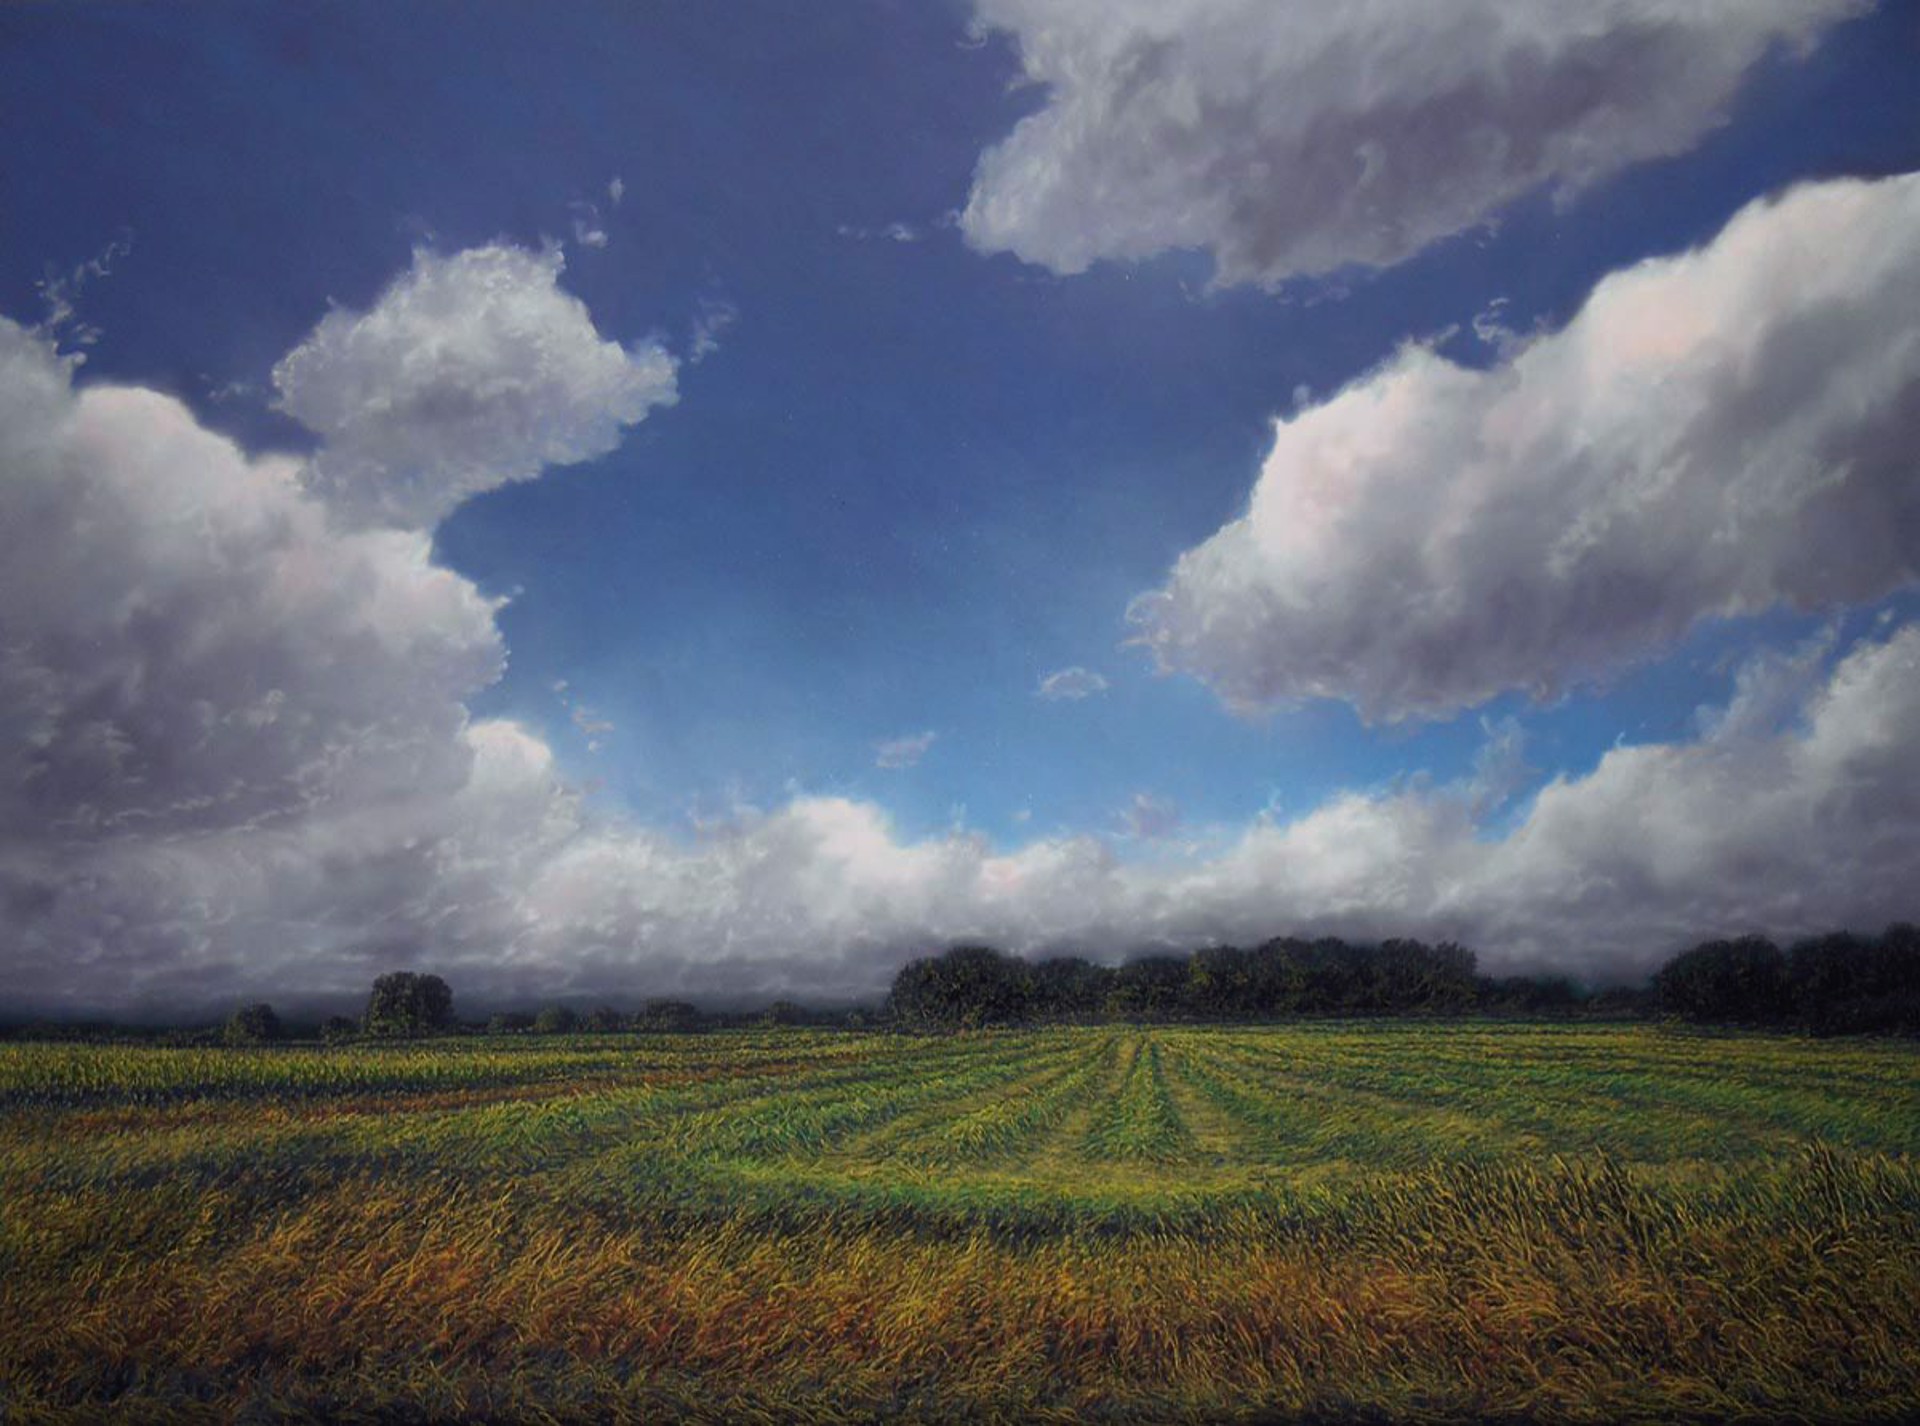 Windrows and Cumulus Clouds by Ellen Wagener